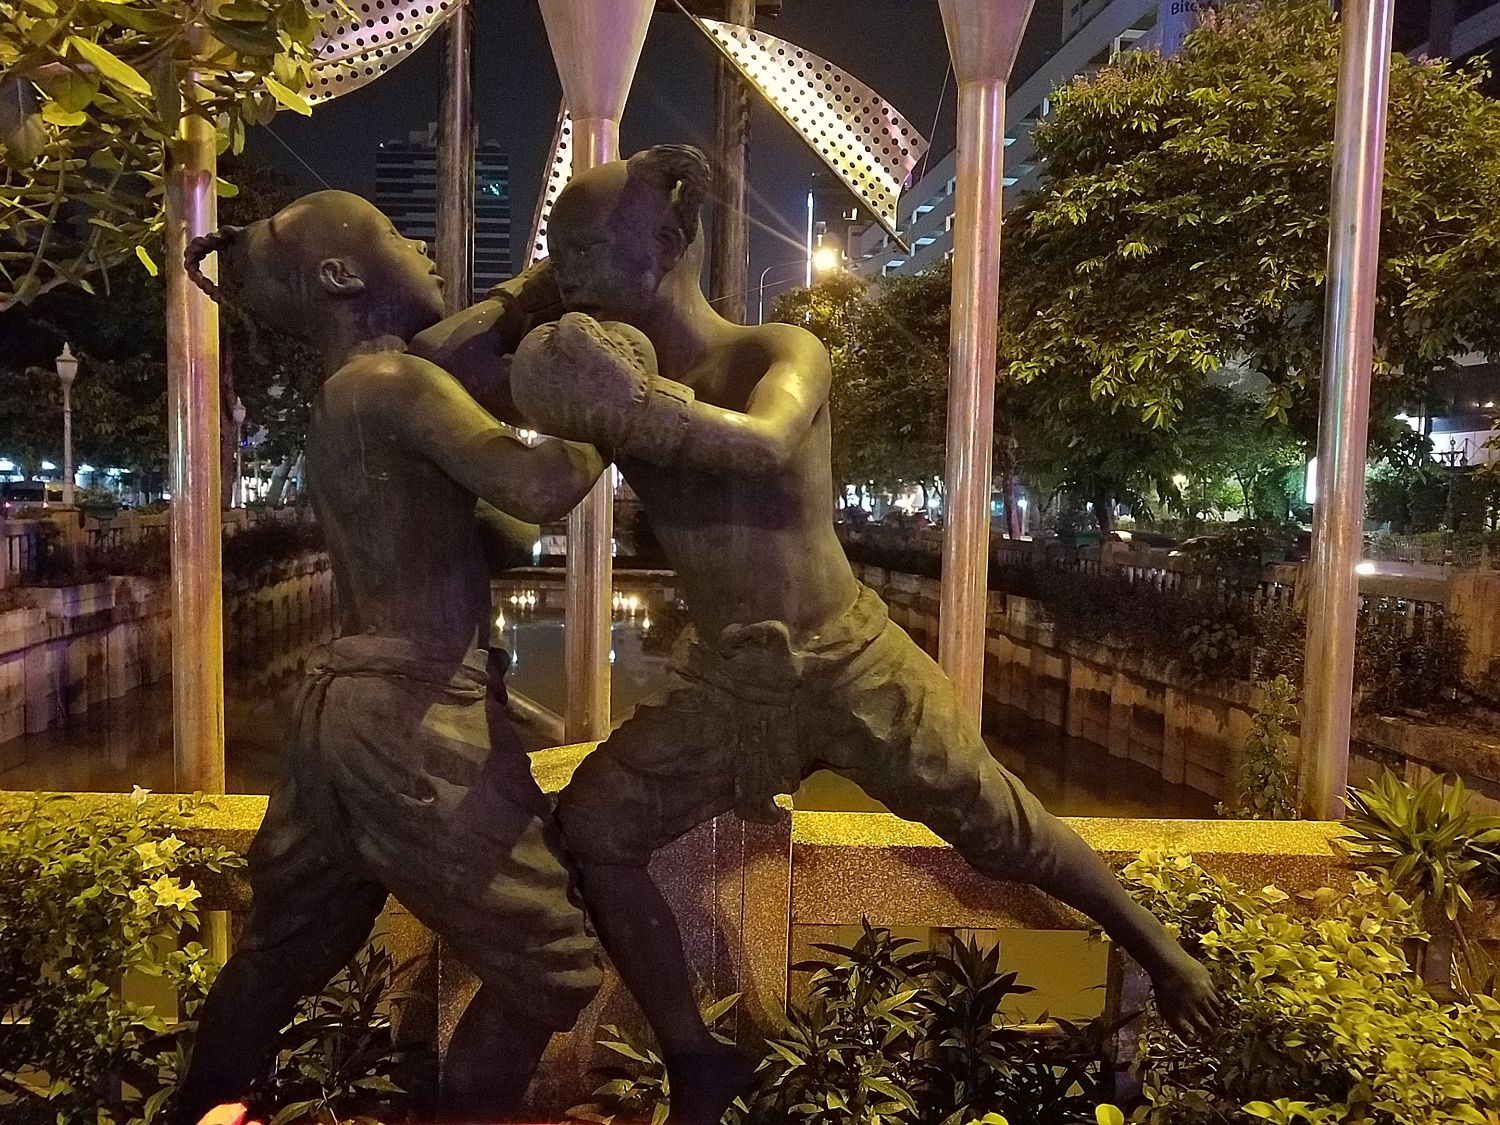 Thai boxing is a national sport and martial art